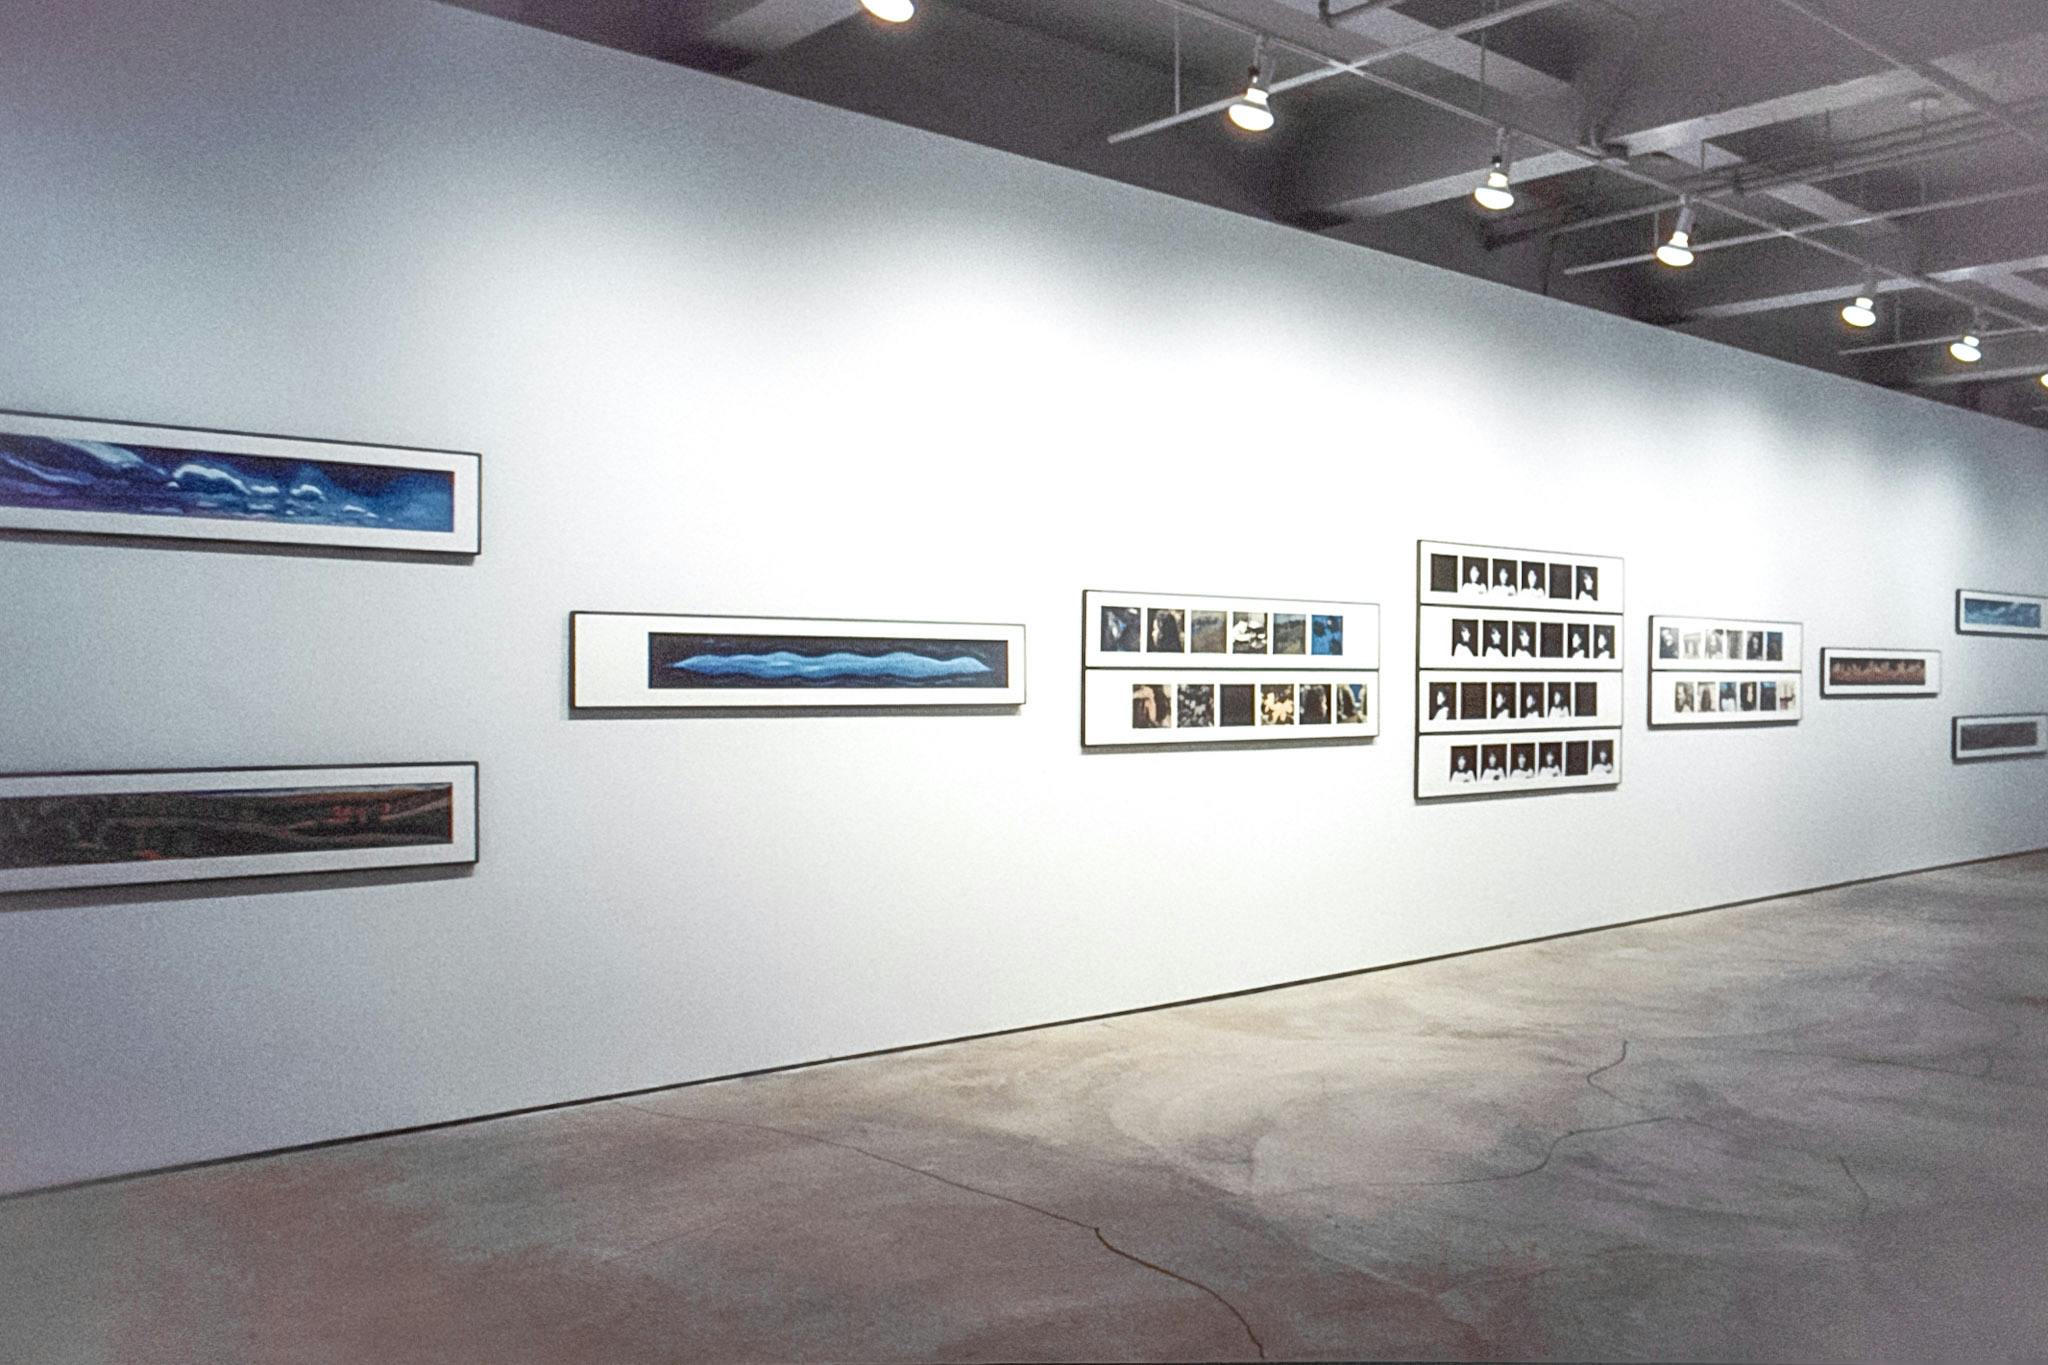 An installation view of the gallery shows photograph pieces mounted on a wall. Some of these photographs have a narrow-wide shape, in which blue wavy shapes are depicted in a dark background.